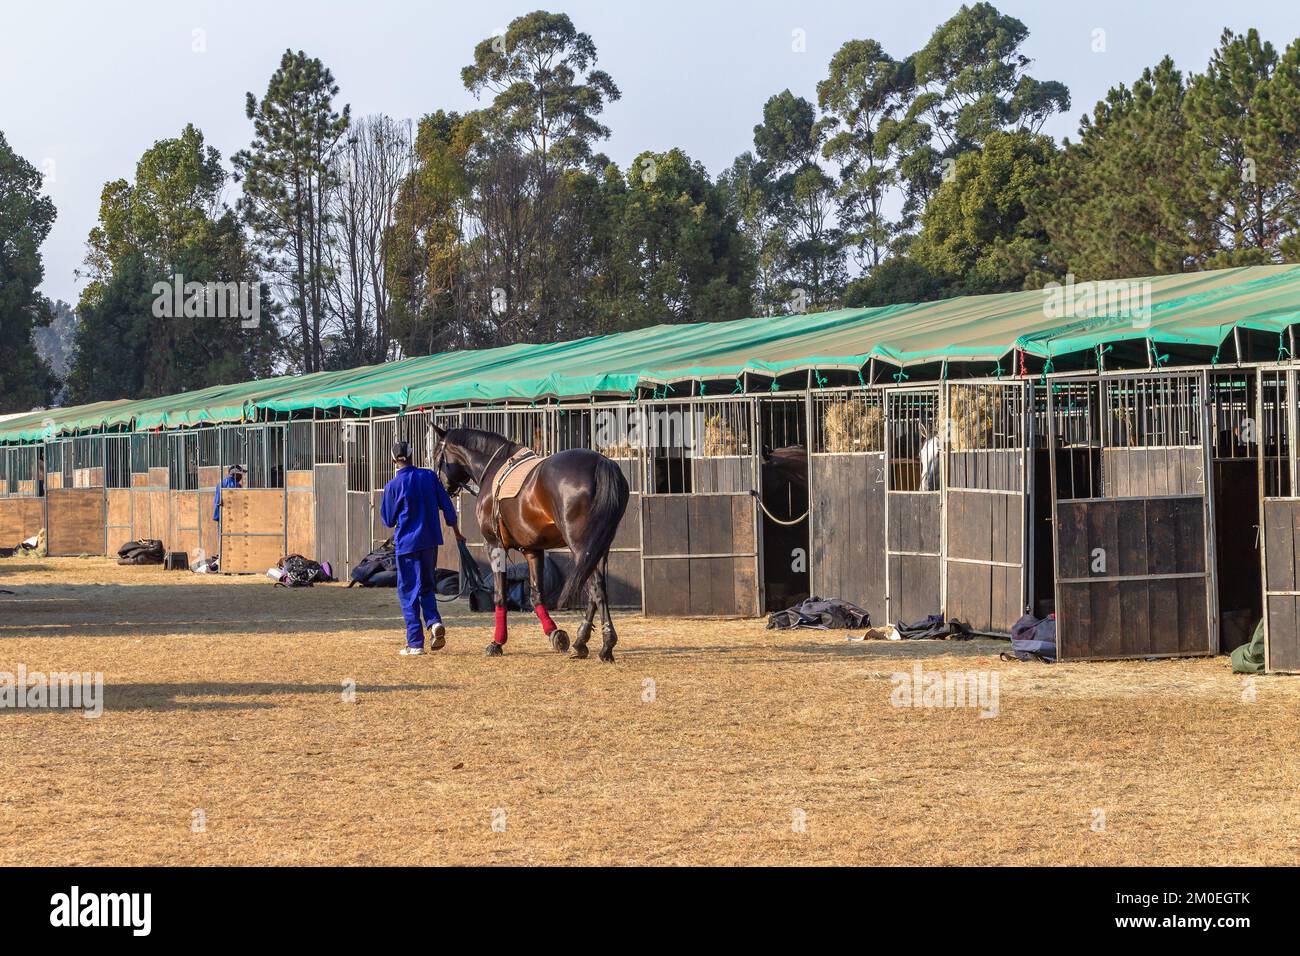 Equestrian nationals event portable mobile stables for horses safe keeping at ground venue. Stock Photo